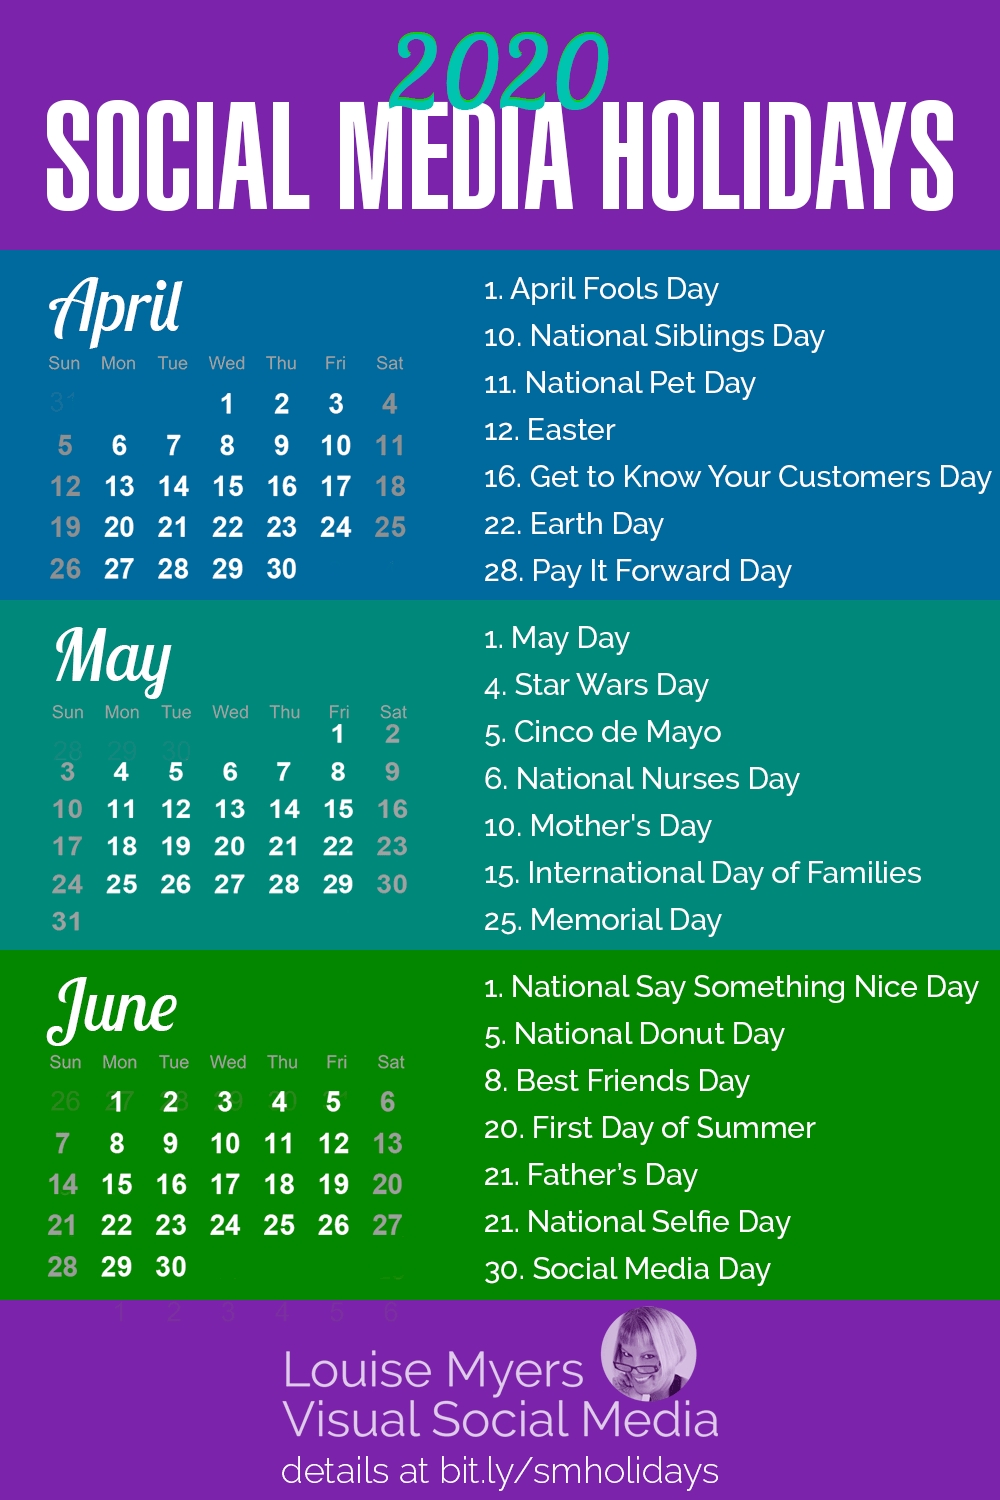 84 Social Media Holidays You Need In 2020: Indispensable! Exceptional 2020 Calendar Important Dates